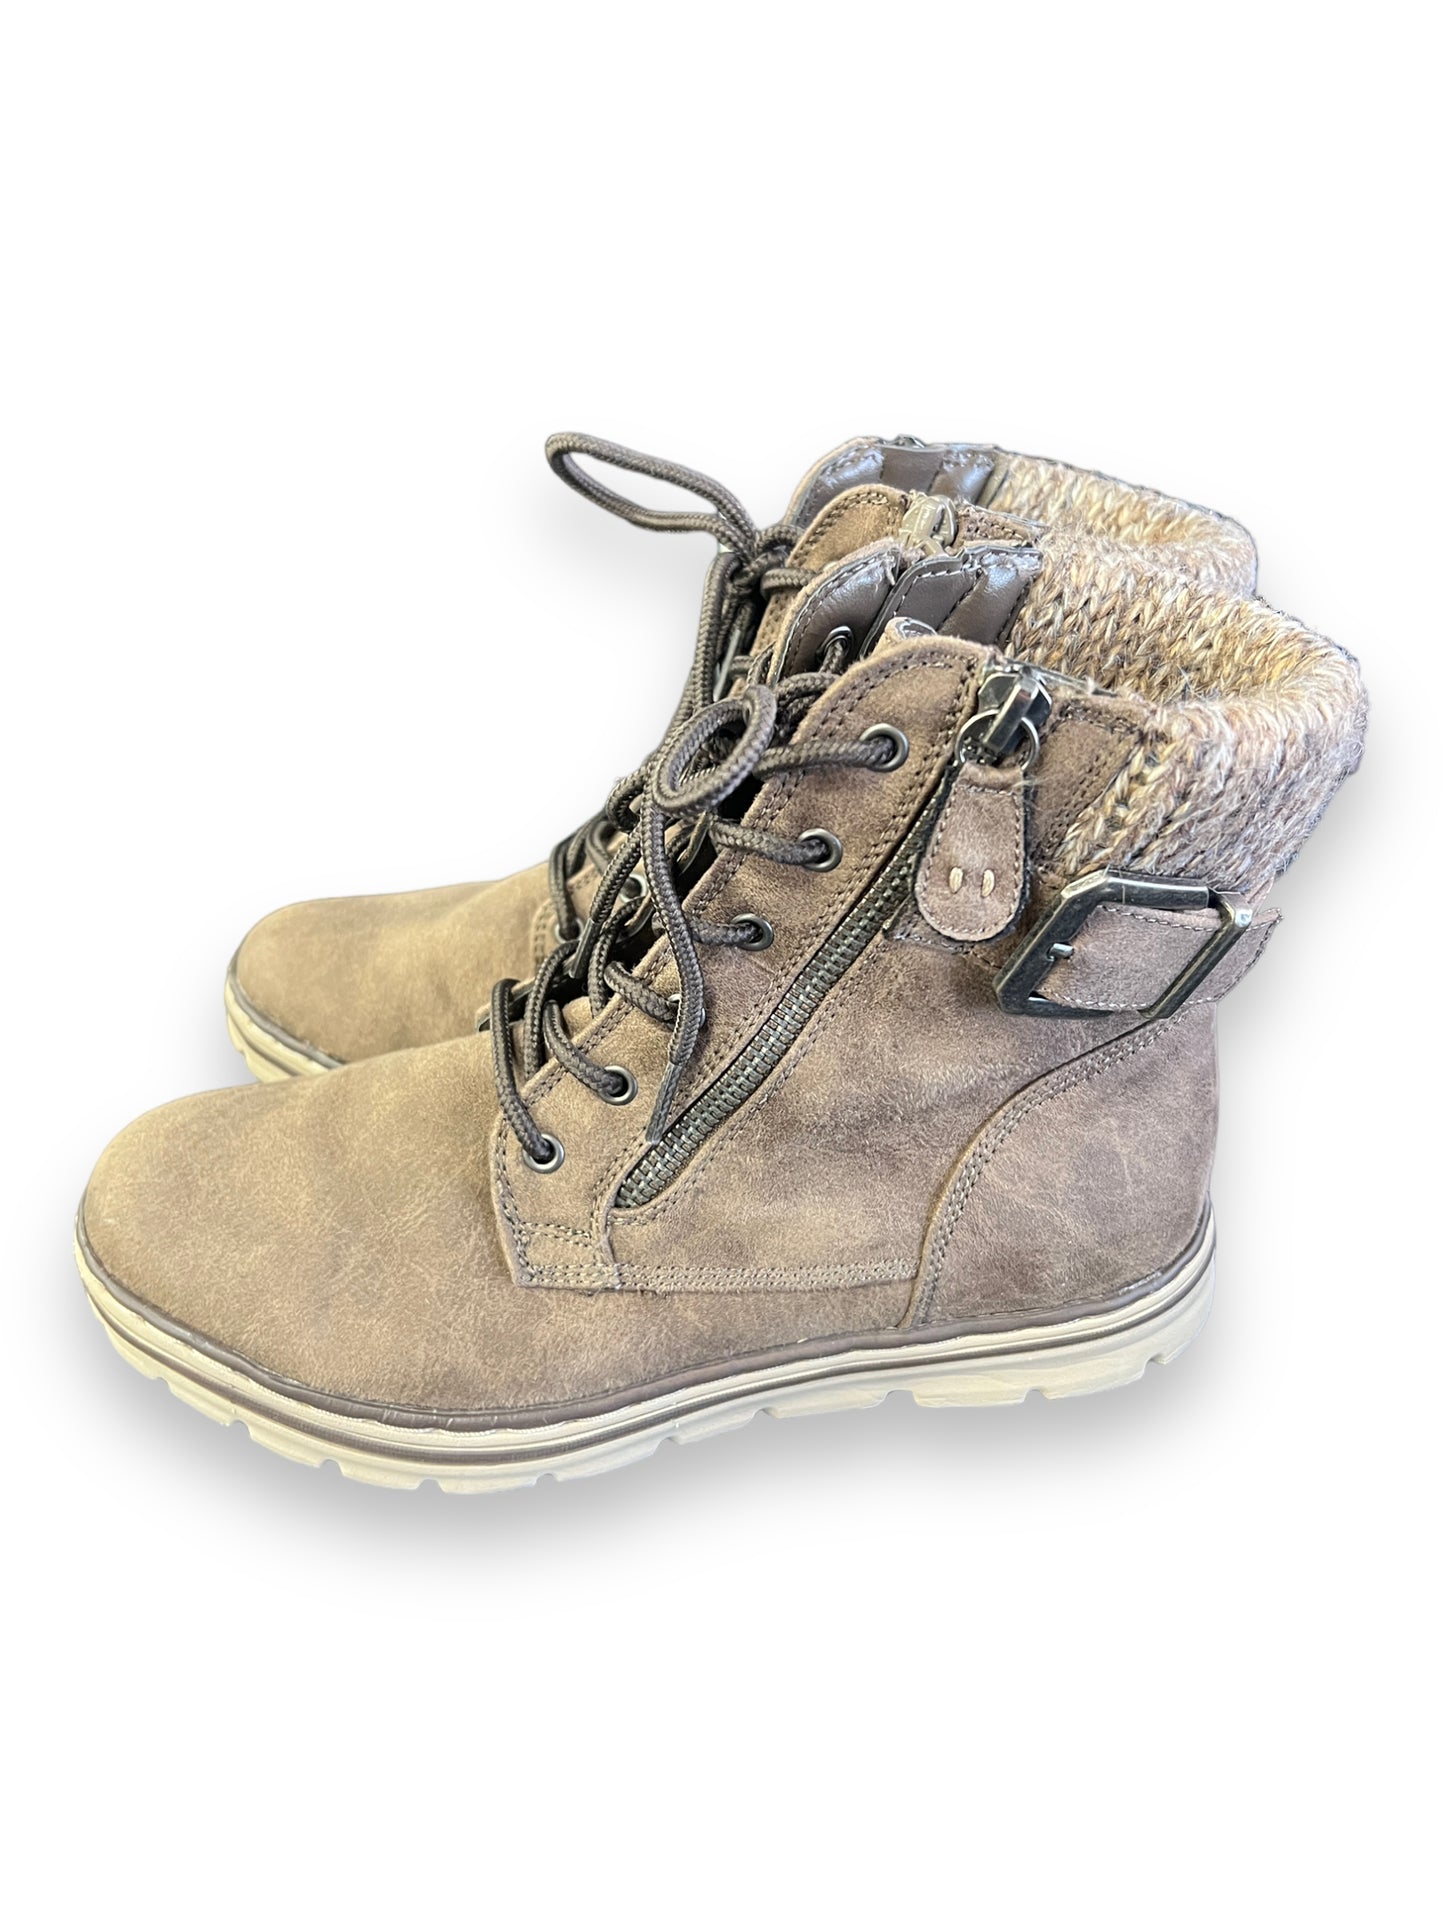 Boots Hiking By White Mountain  Size: 6